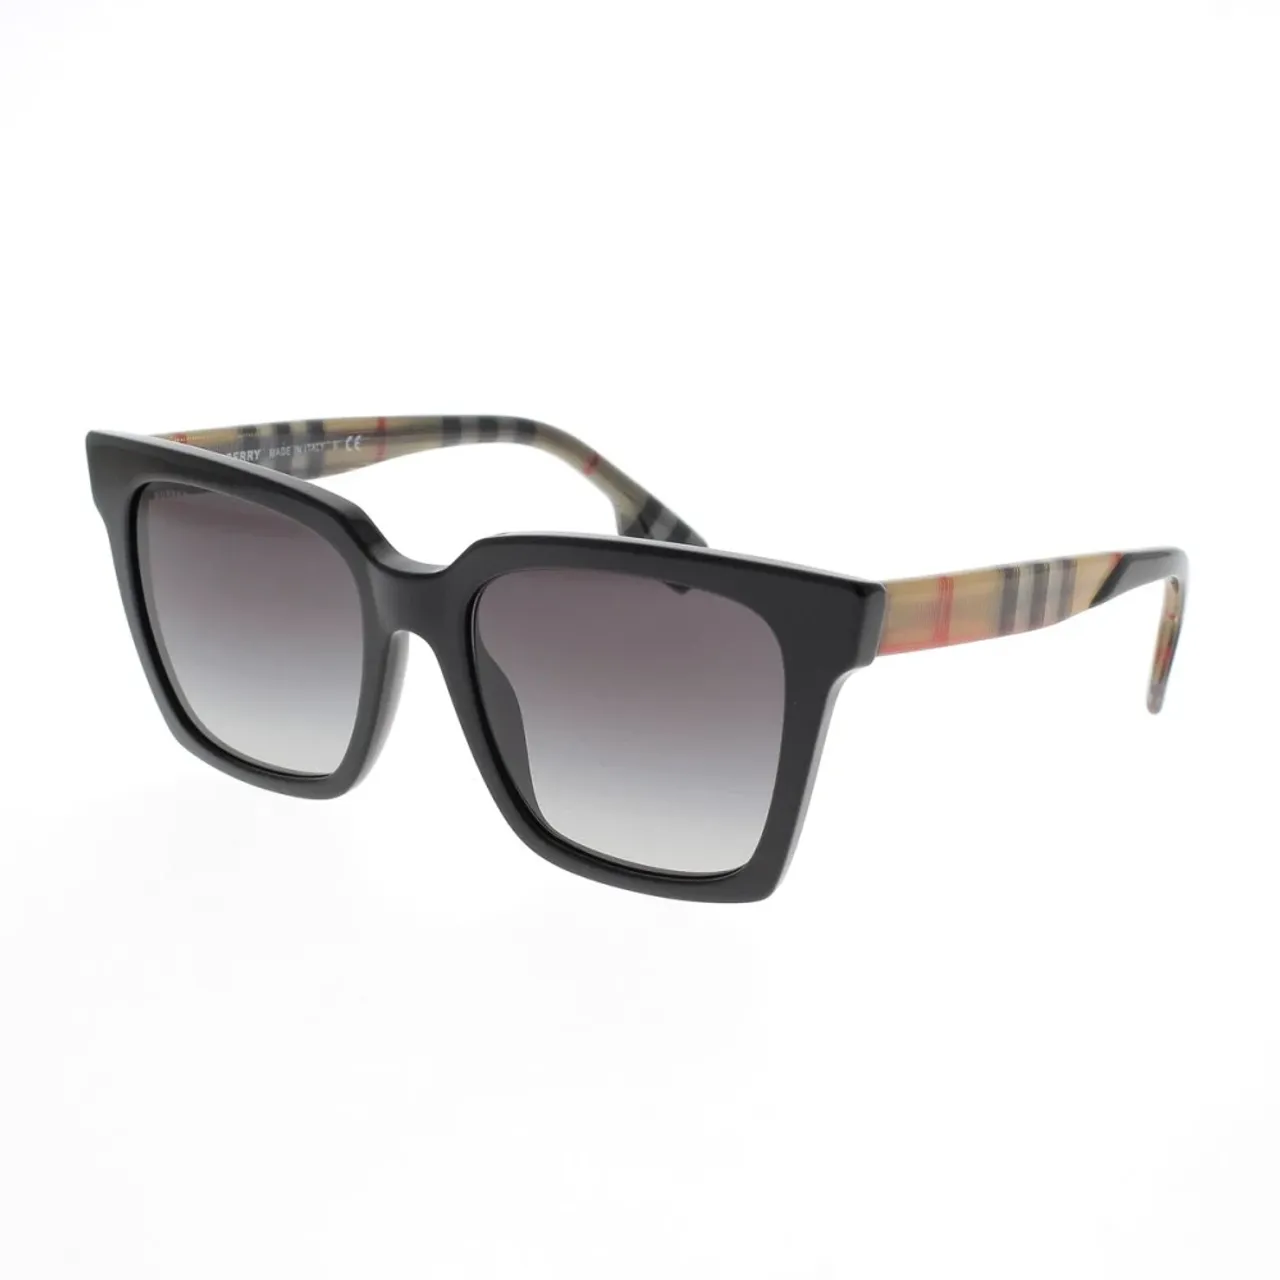 Burberry , Bold Square Sunglasses with Textured Arms ,Black female, Sizes: